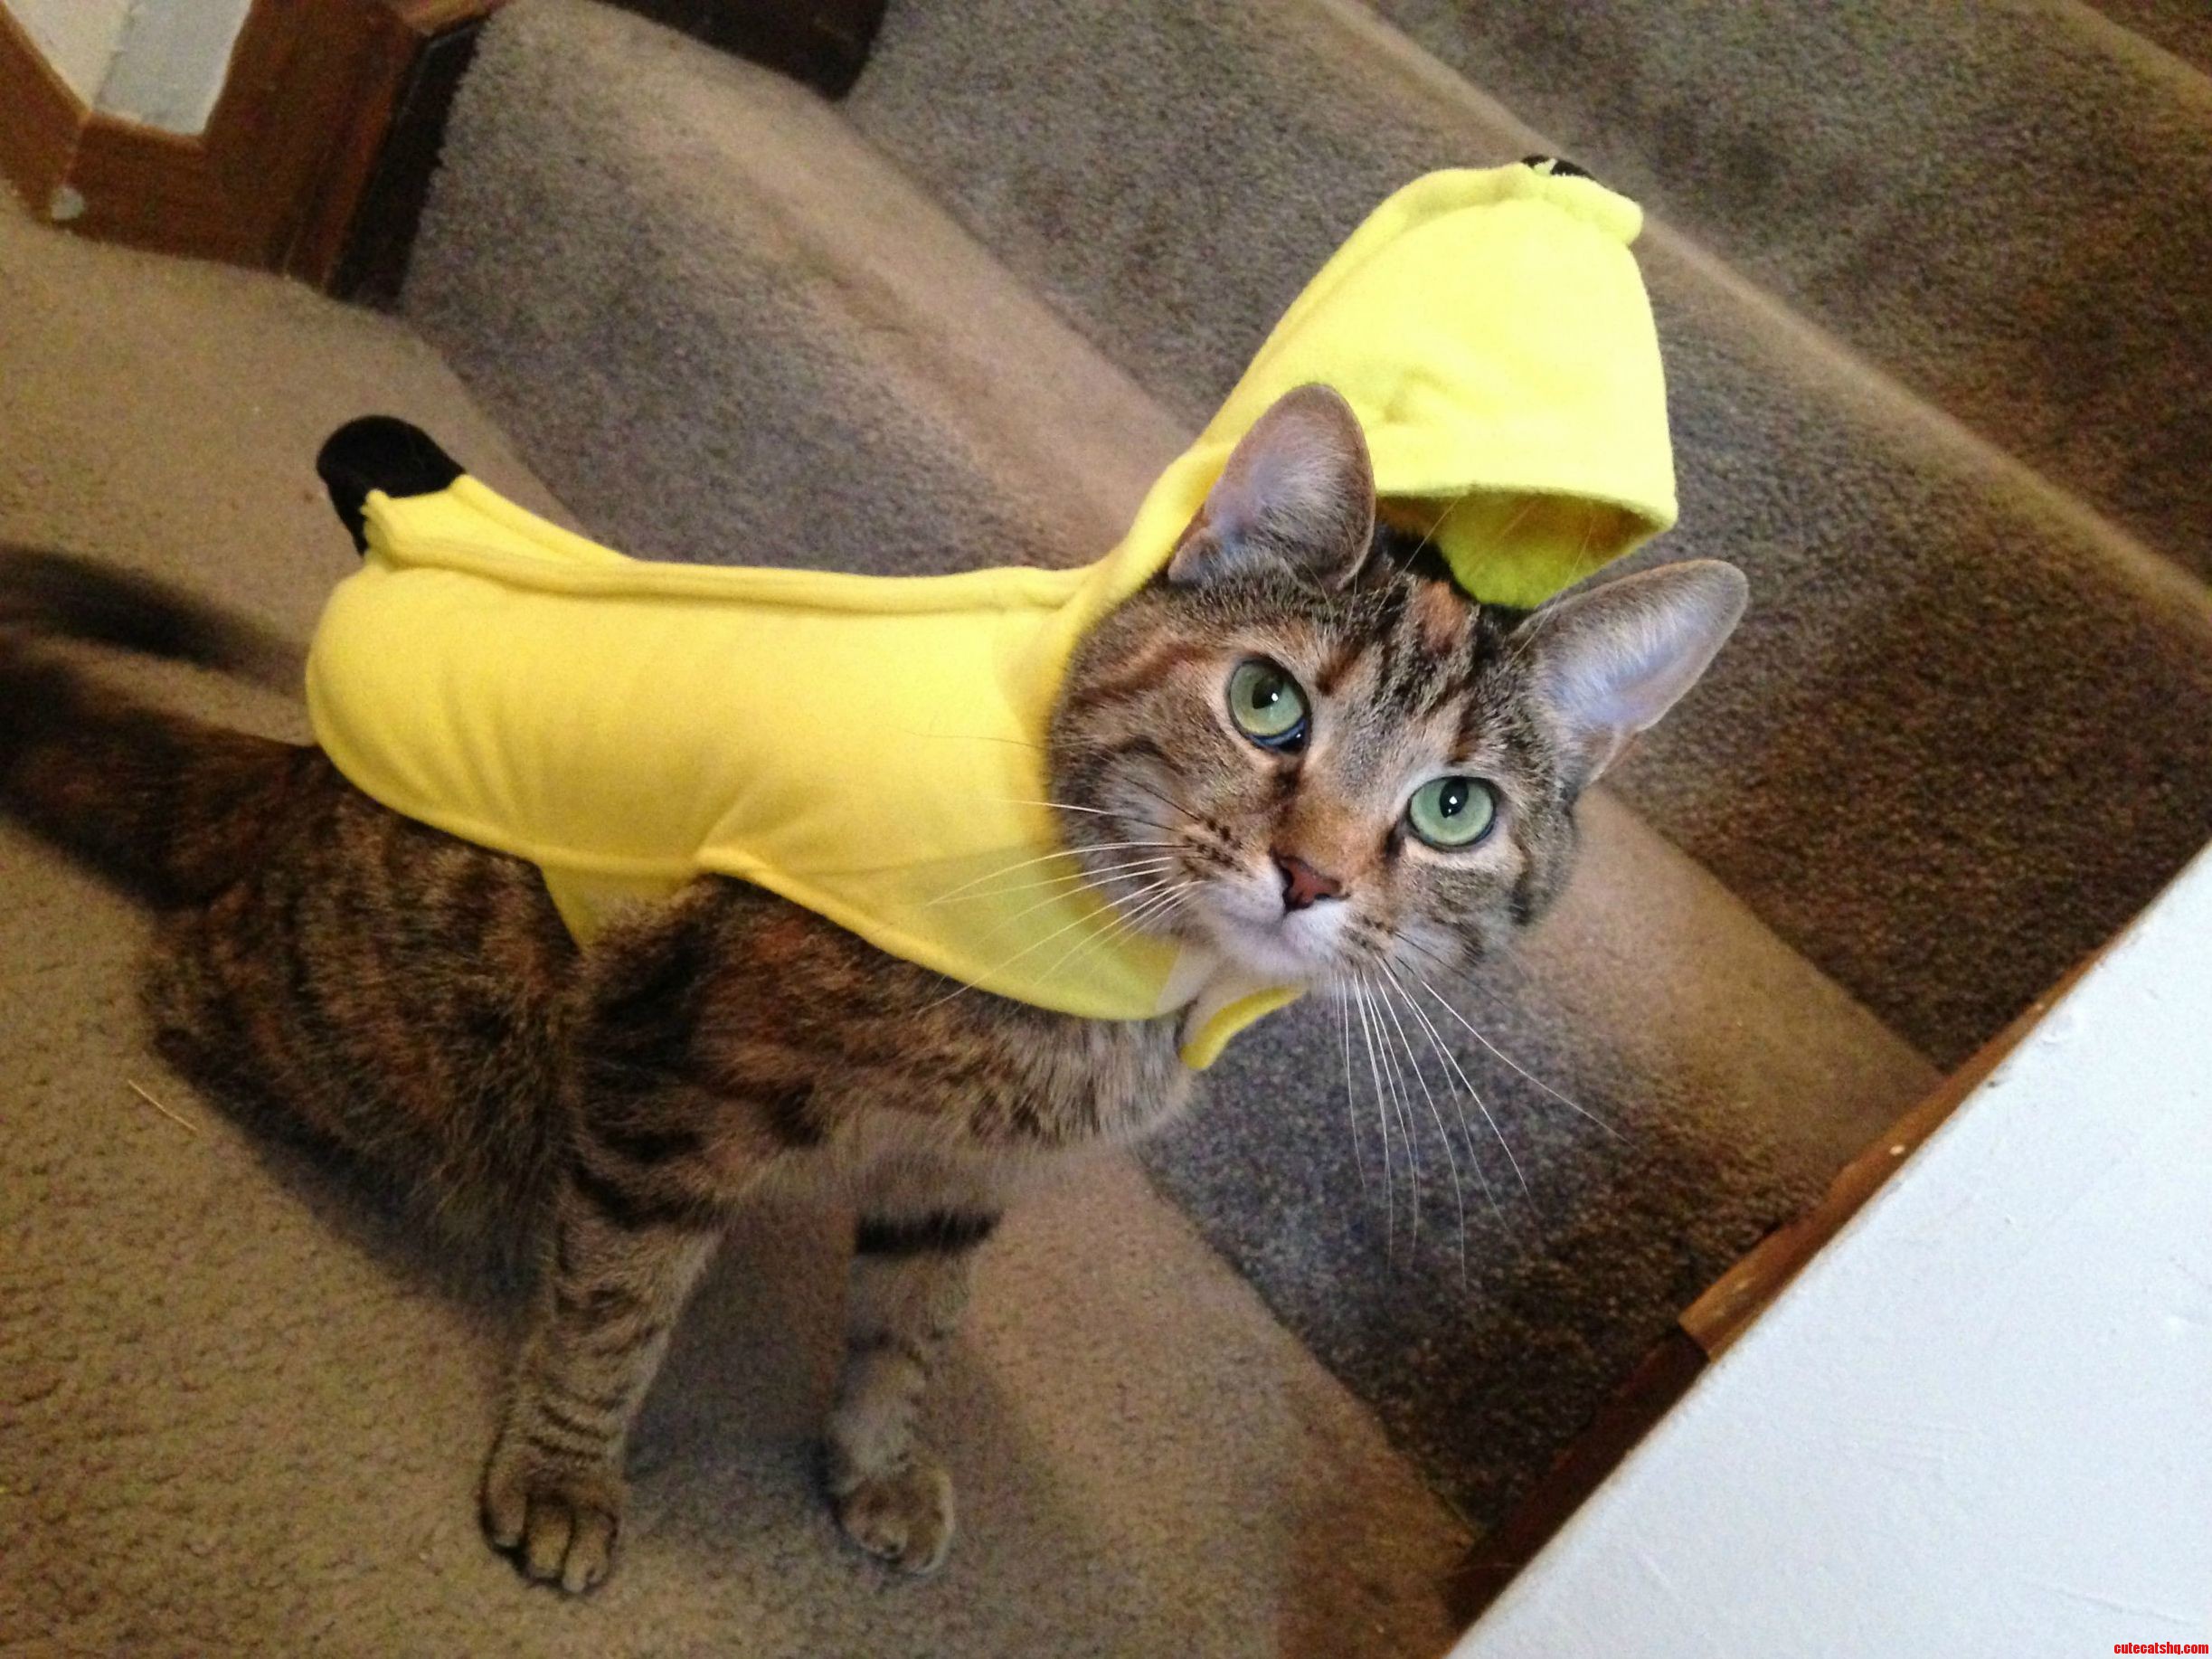 So thrilled to be a chi-cat-a banana